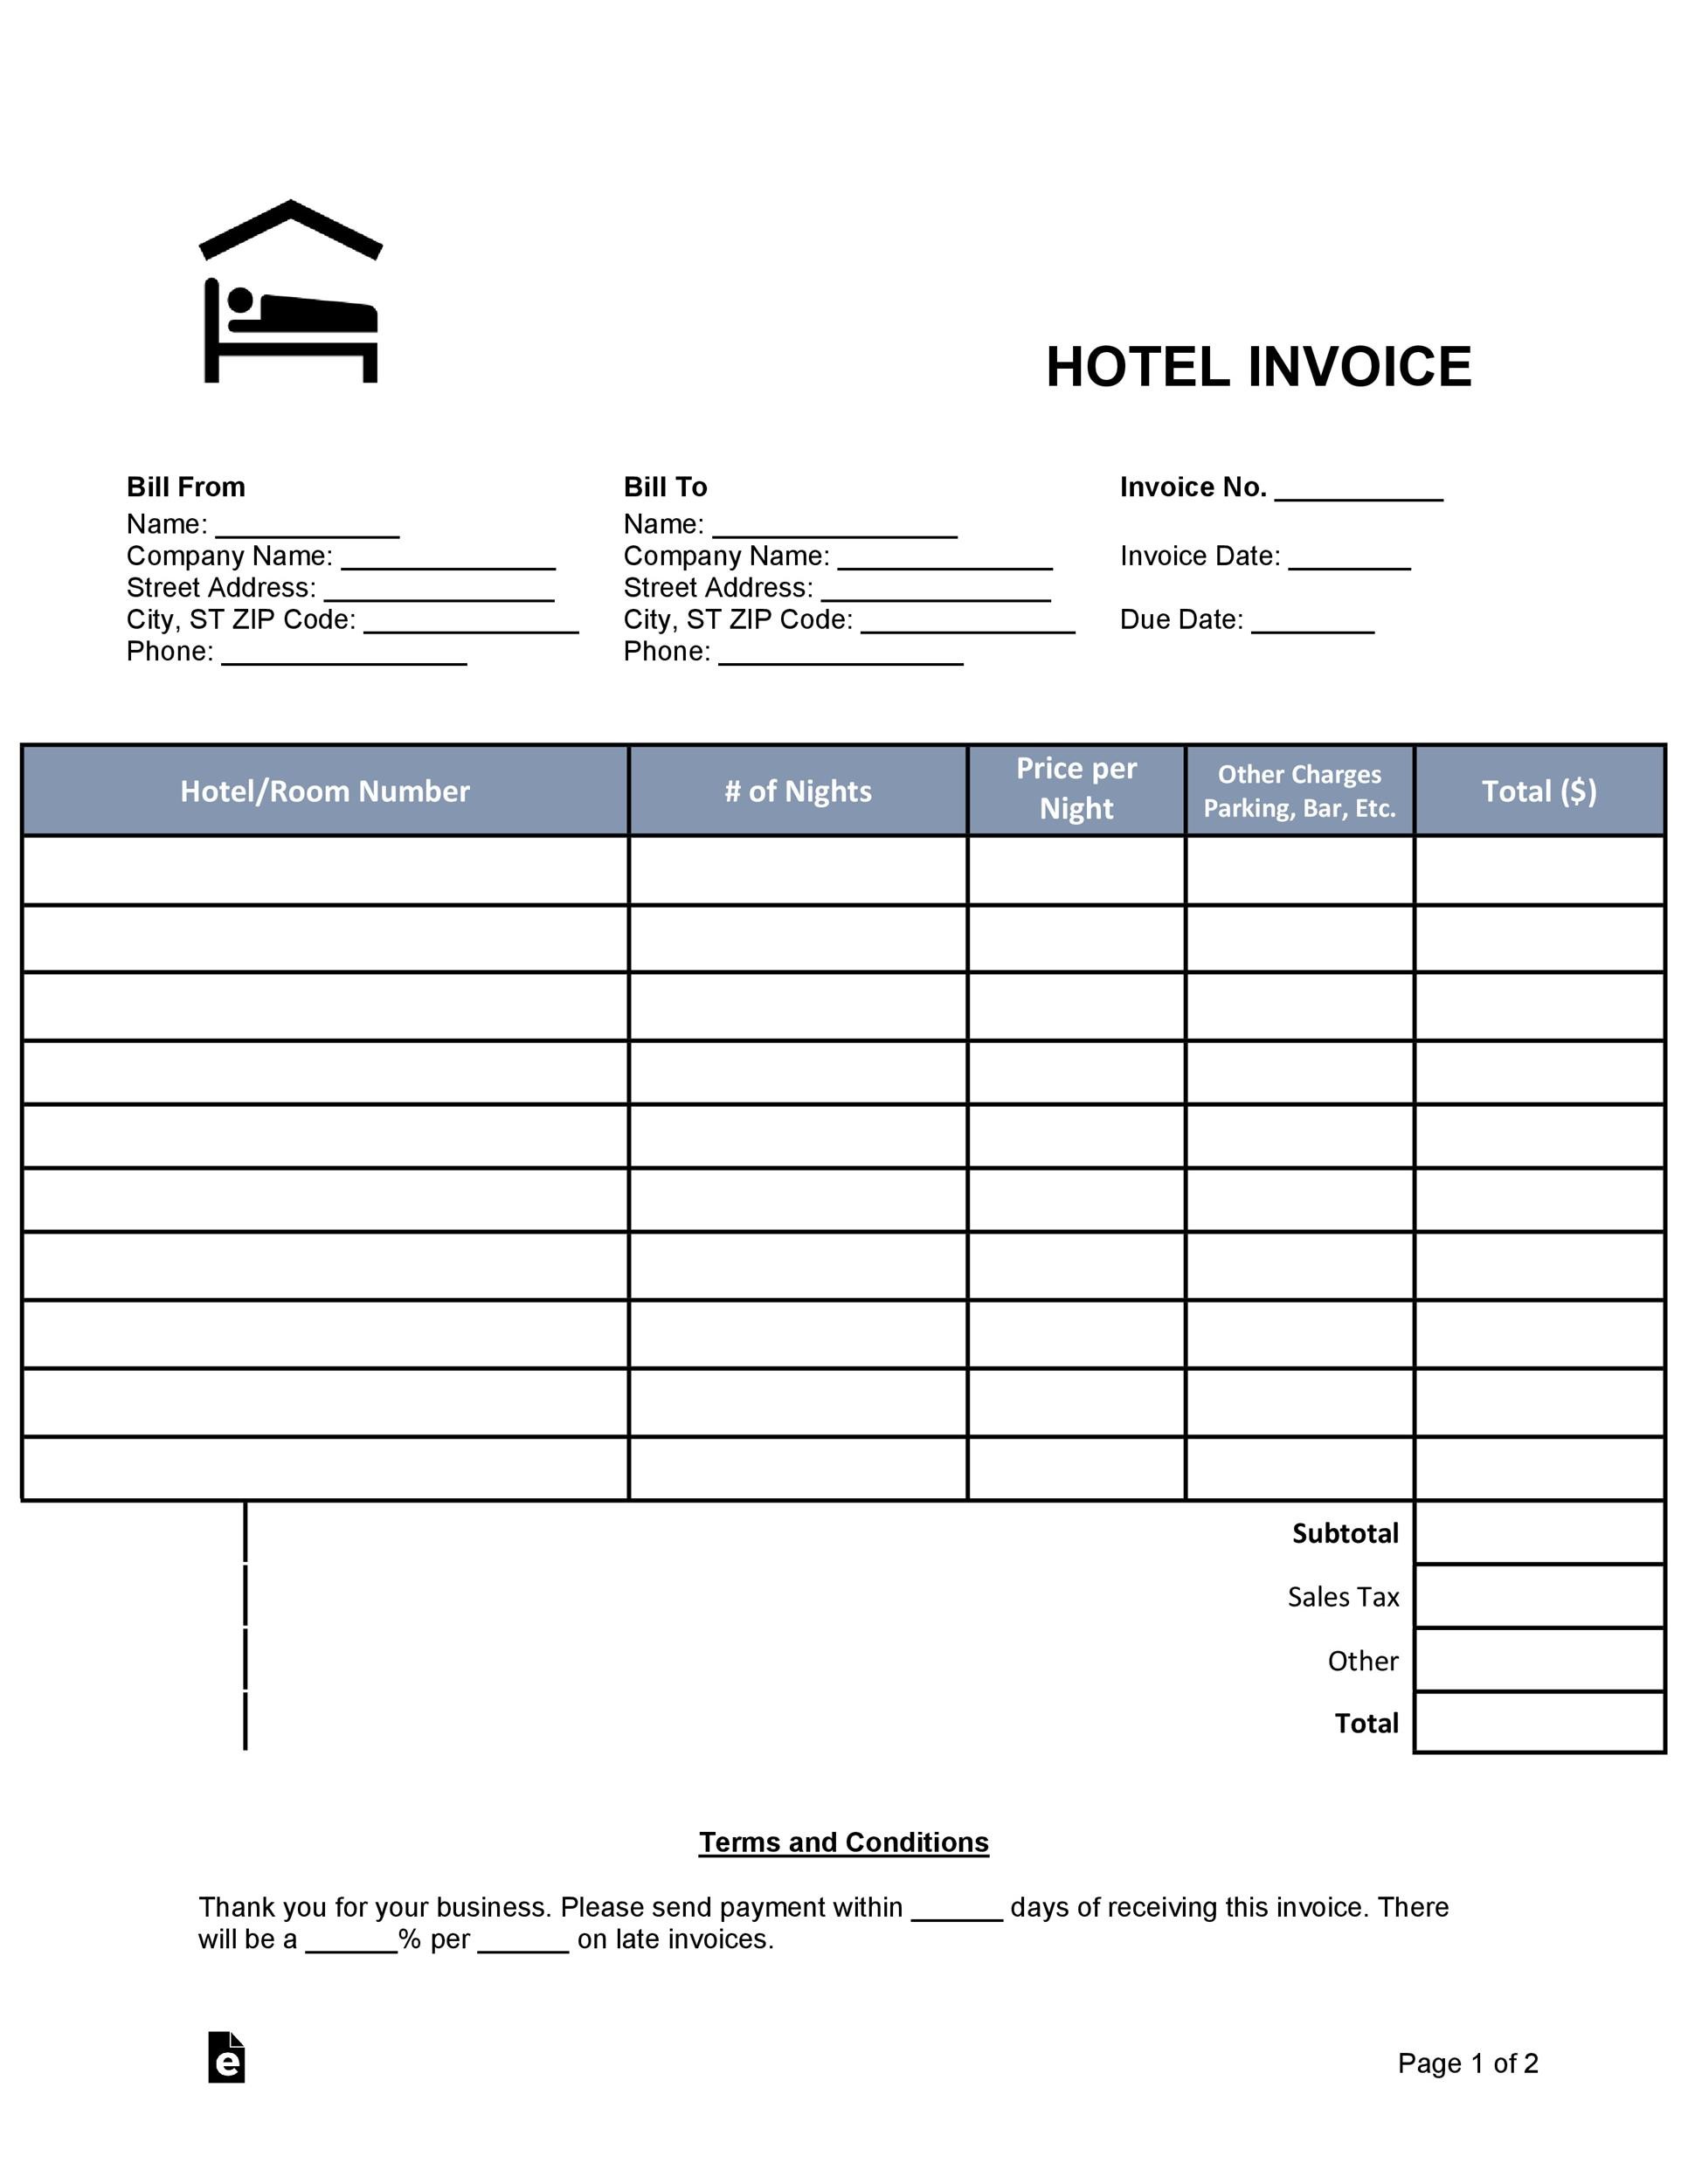 free-hotel-receipt-template-tutore-org-master-of-documents